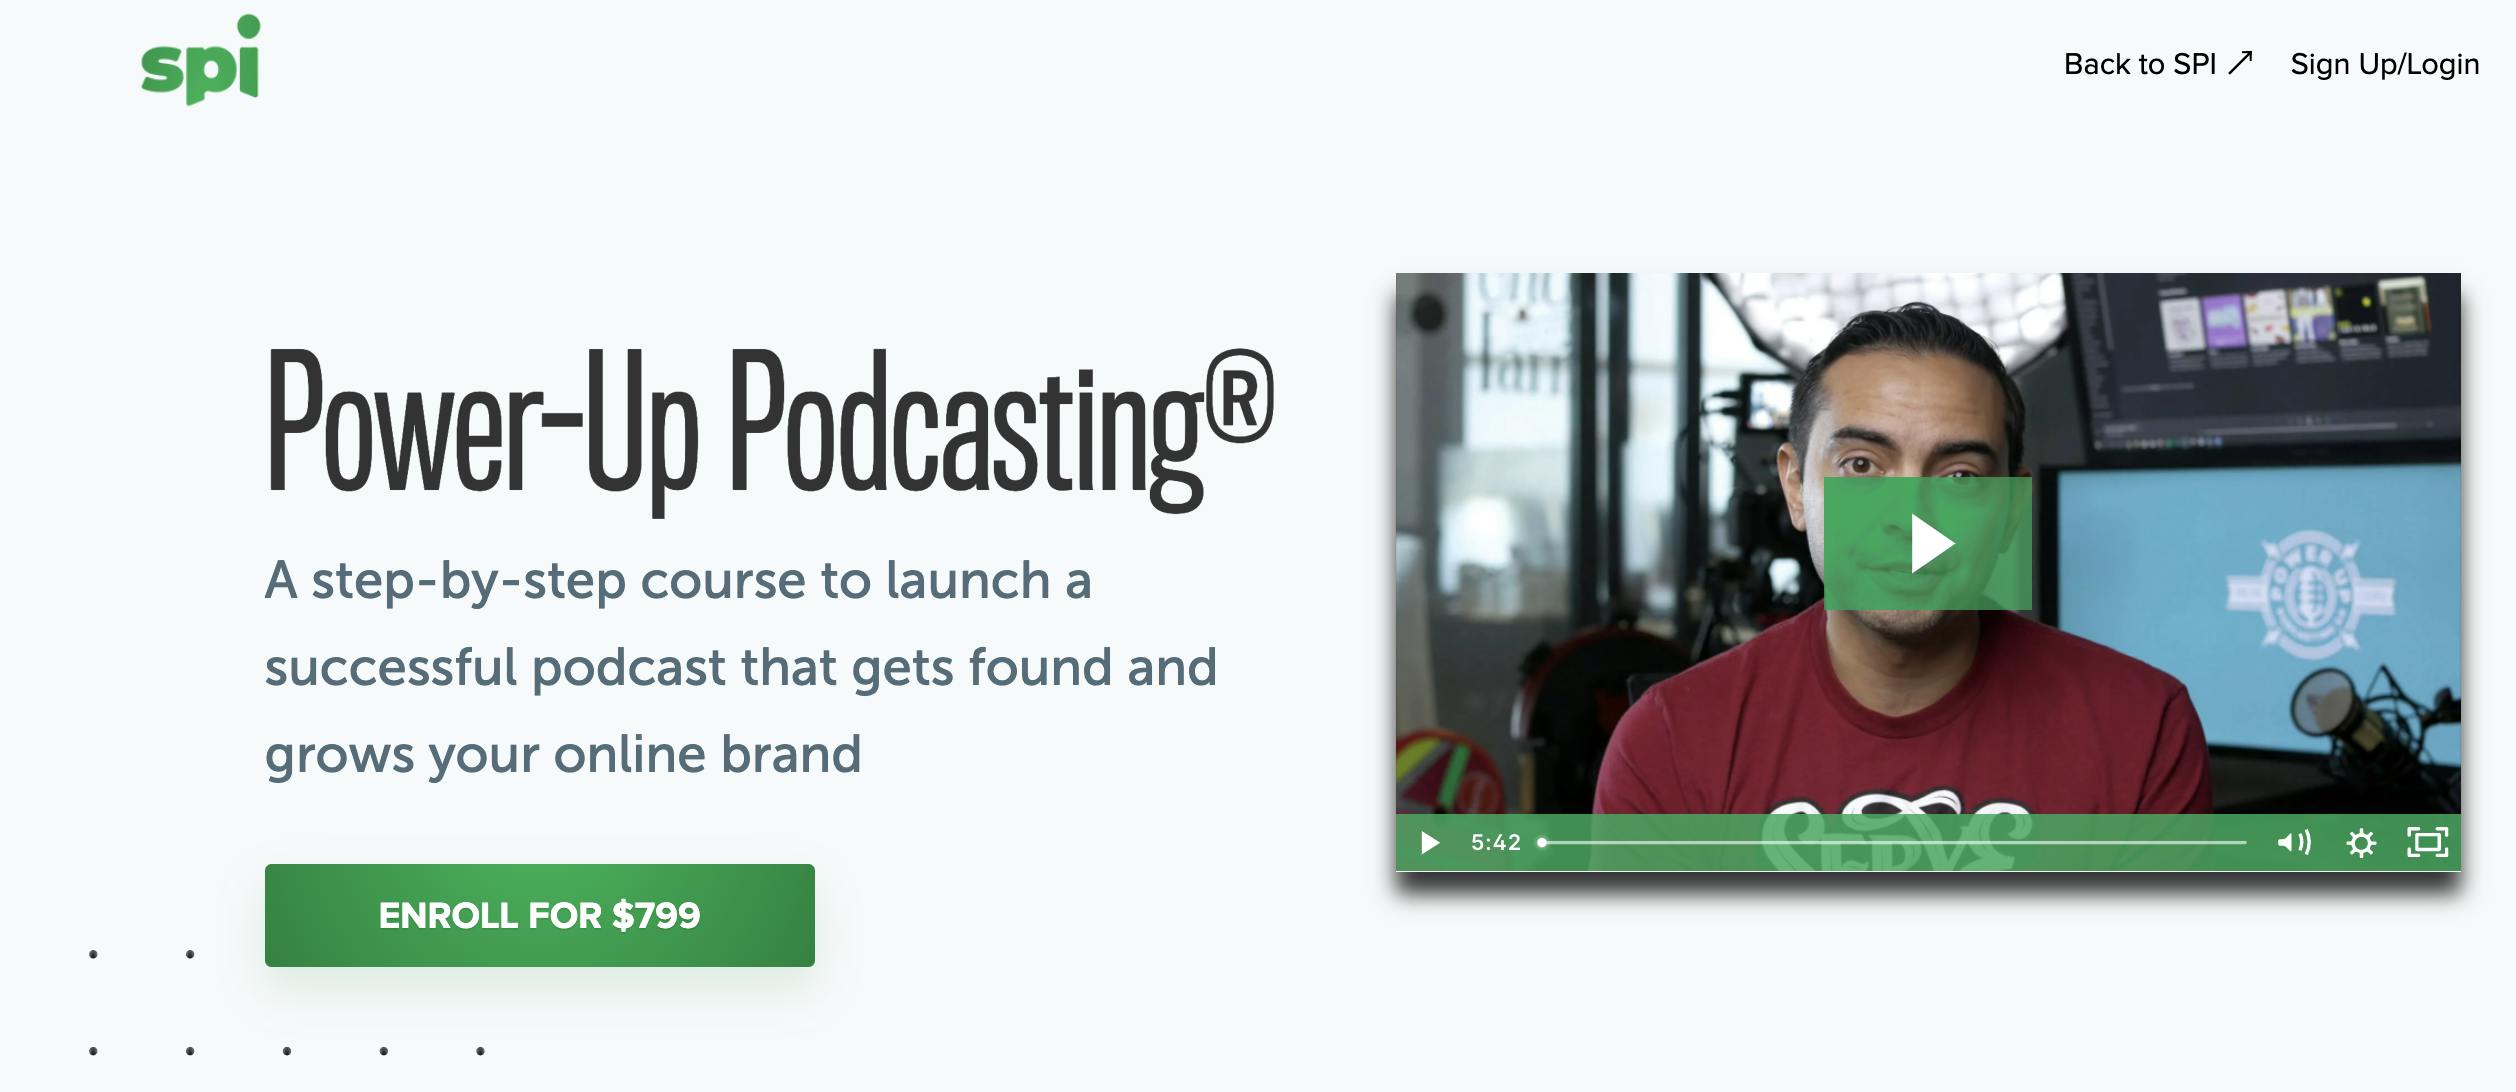 Power-Up Podcasting homepage with video thumbnail and course description beside it with green button 